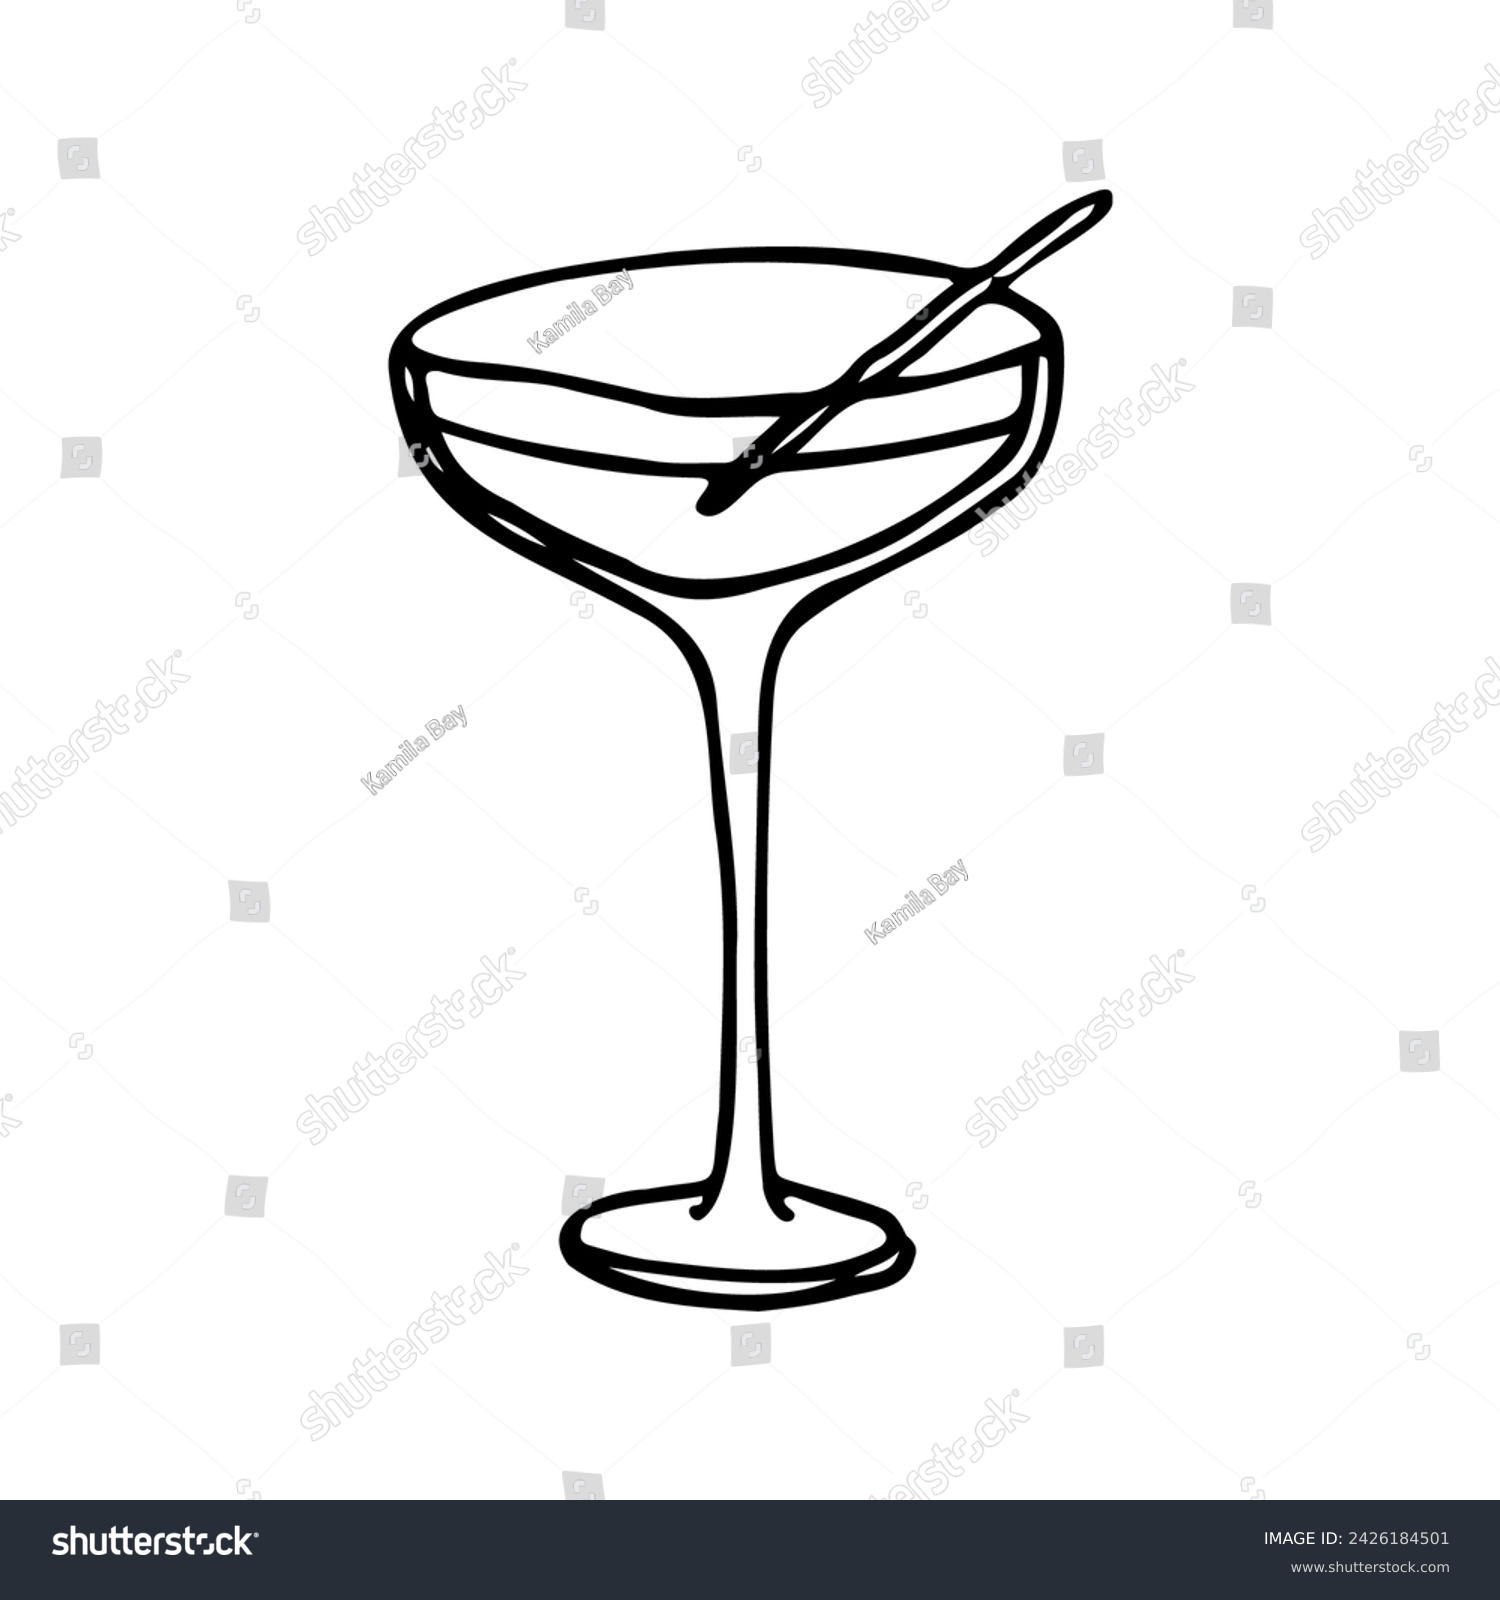 SVG of cocktail in a martini glass on a long stem with a stick or toothpick. hand drawn cocktail drawing svg